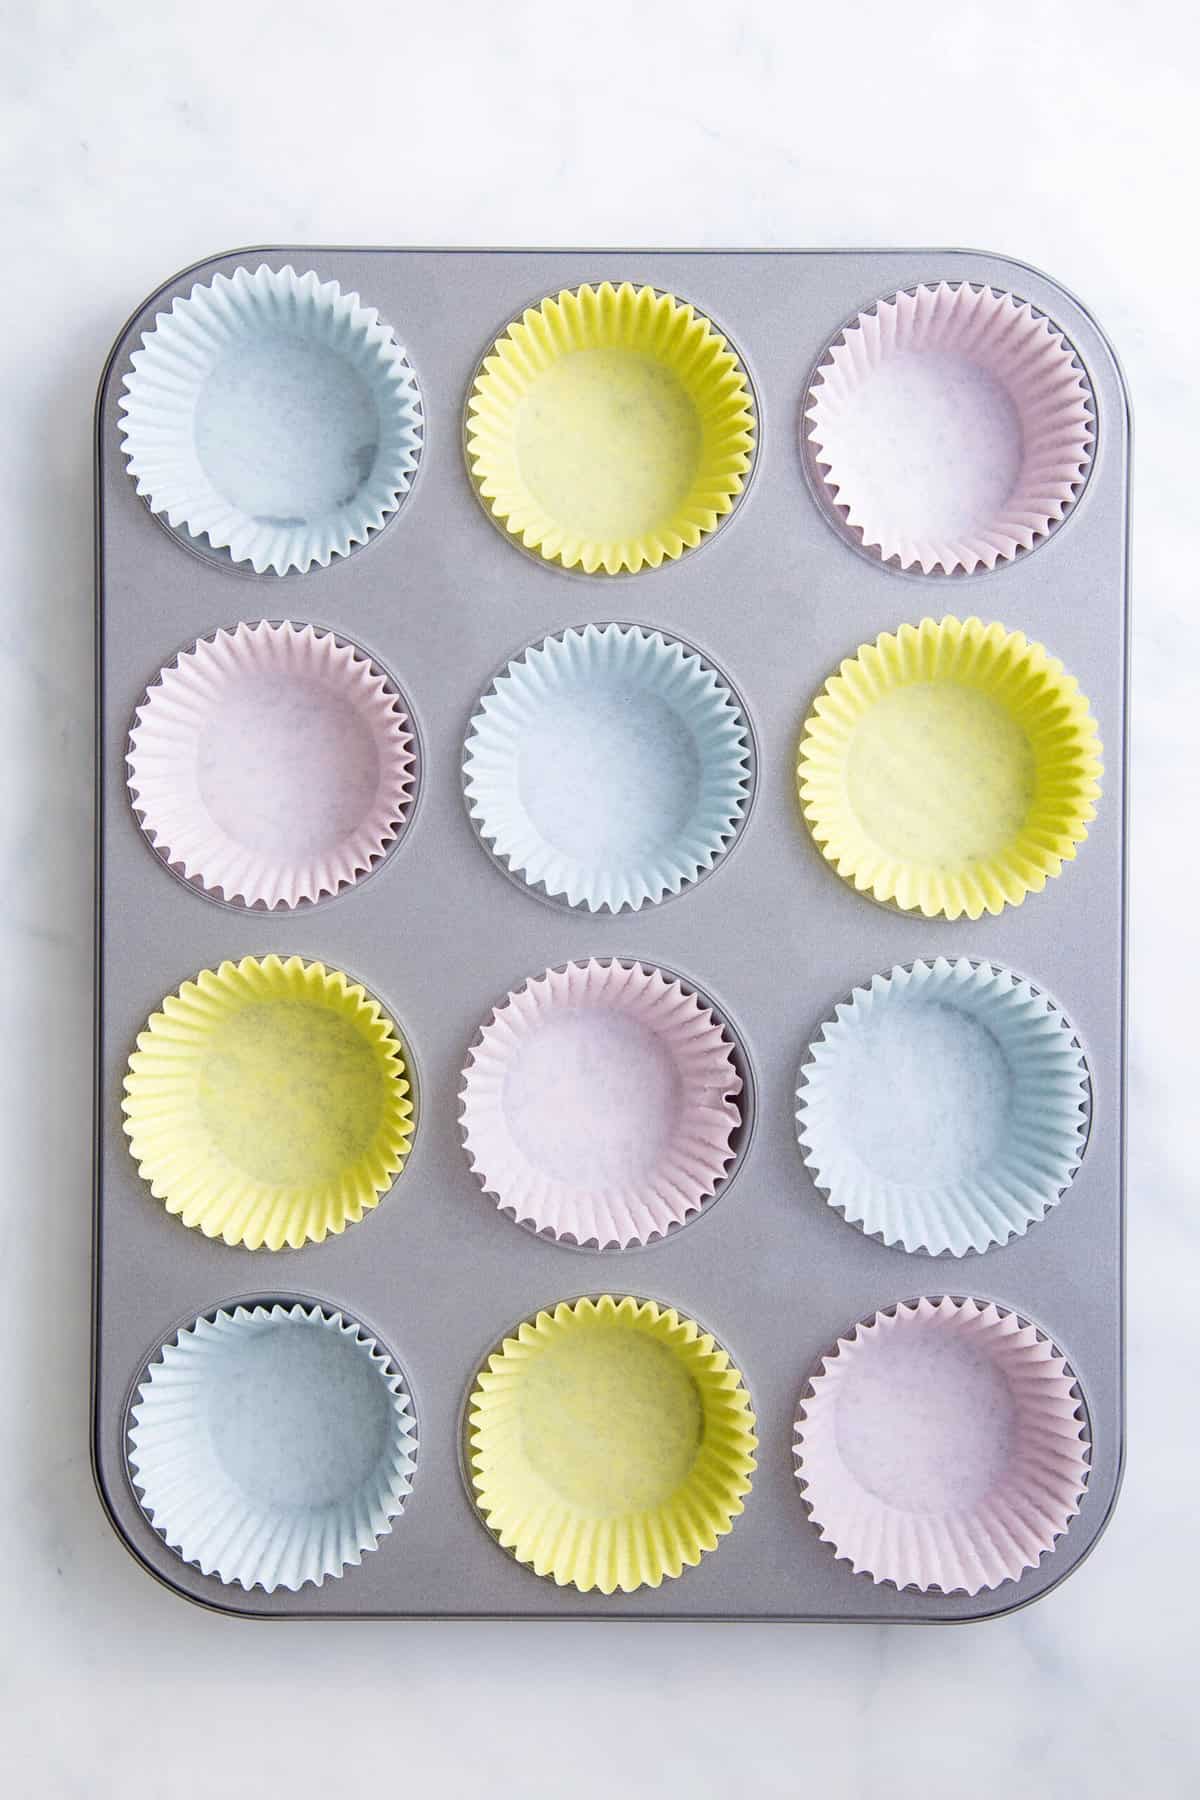 12 muffin tin lined with pastel colored liners